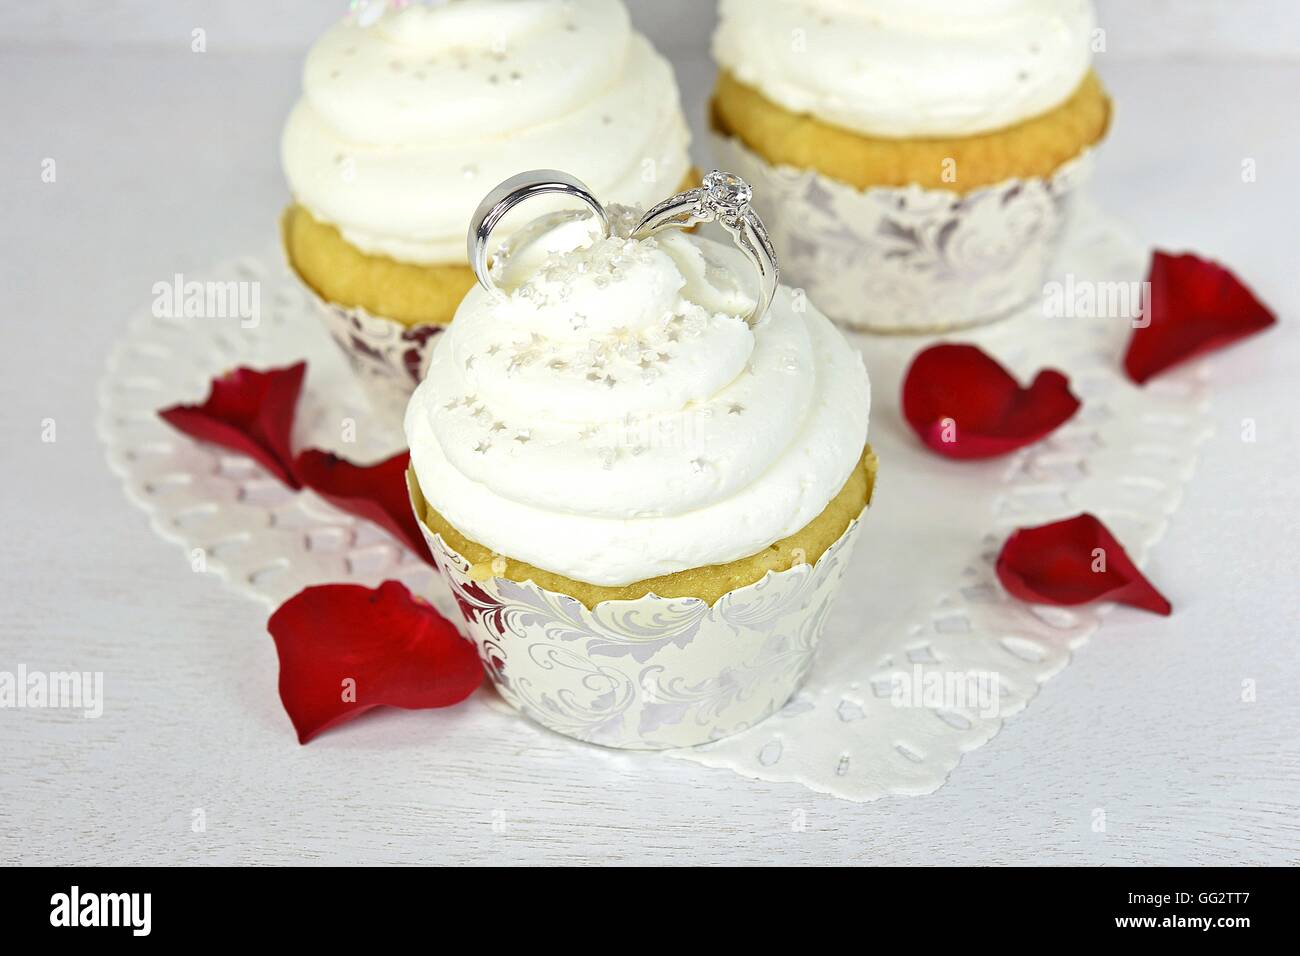 Wedding rings in cupcake icing with star sprinkles and red rose petals on paper heart doily. Stock Photo